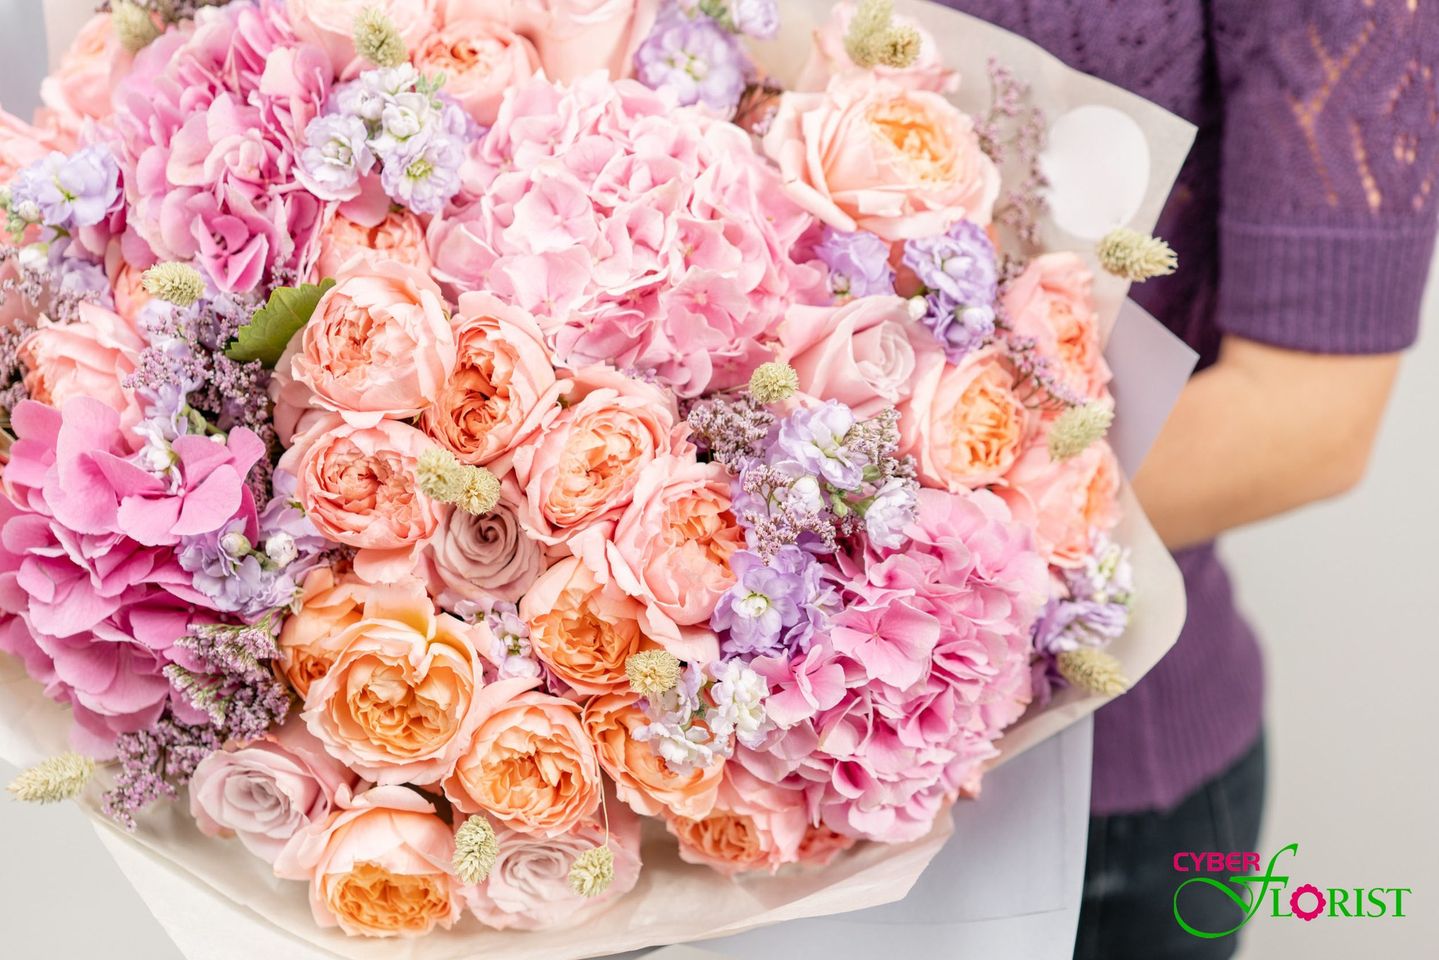 couponfreeonline
Send Flowers Online! National & International Delivery of Flowers